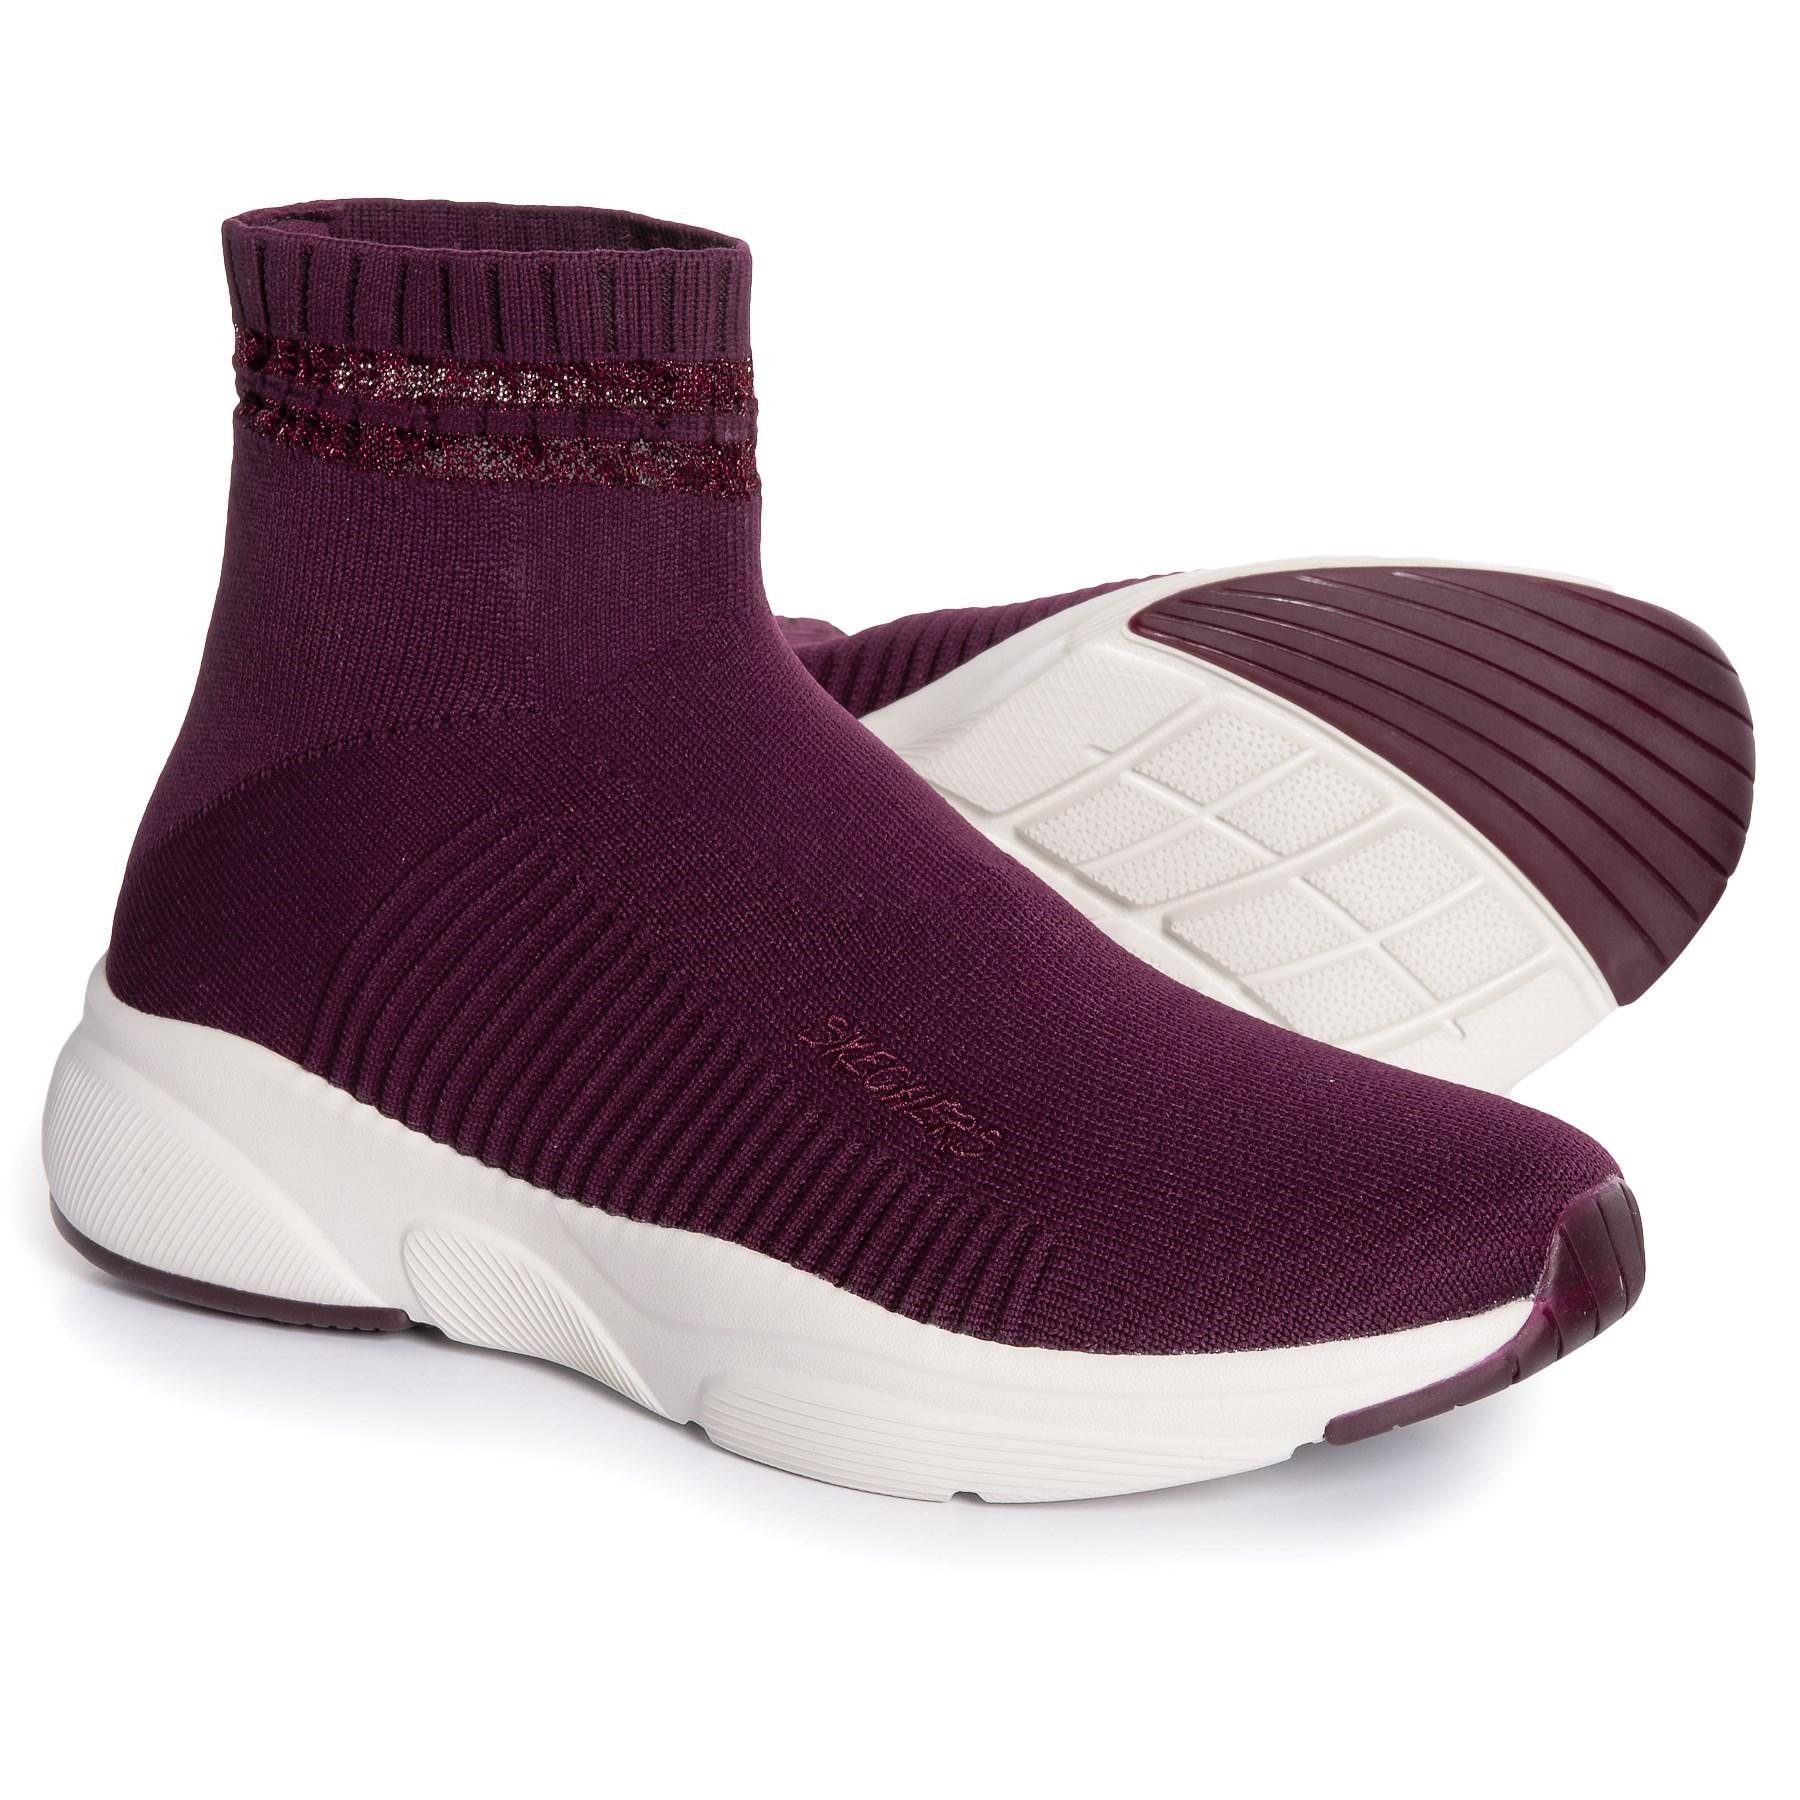 skechers high shoes off 60% - online-sms.in